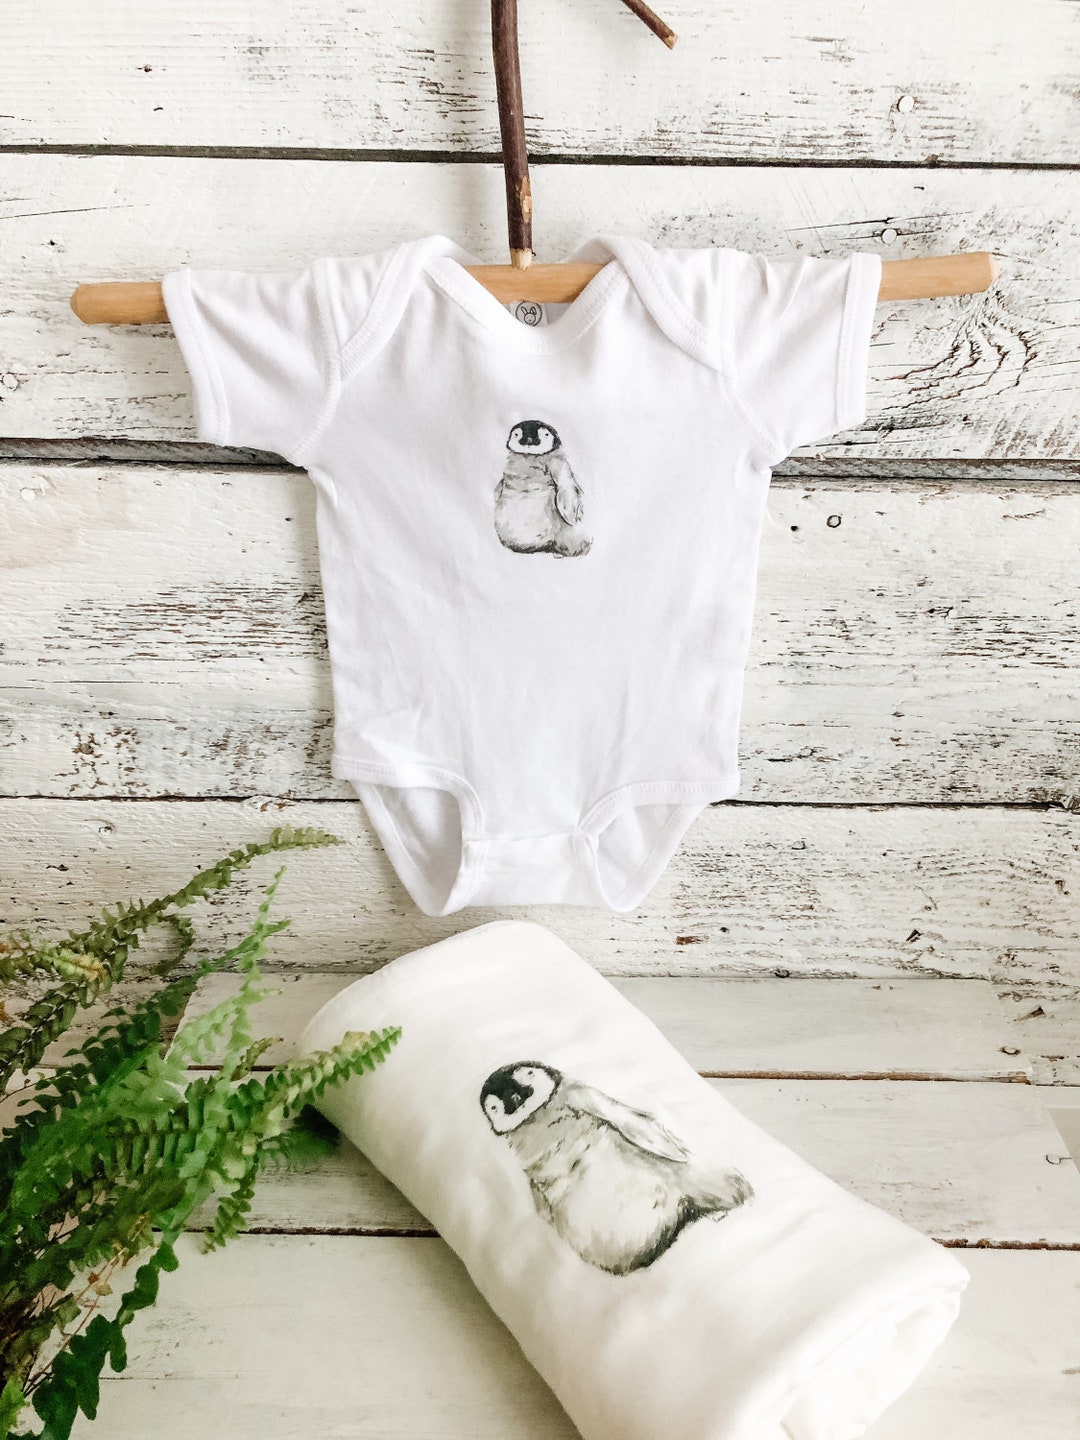 Gift Set for New Baby With Penguin Art on Blanket and Matching - Etsy